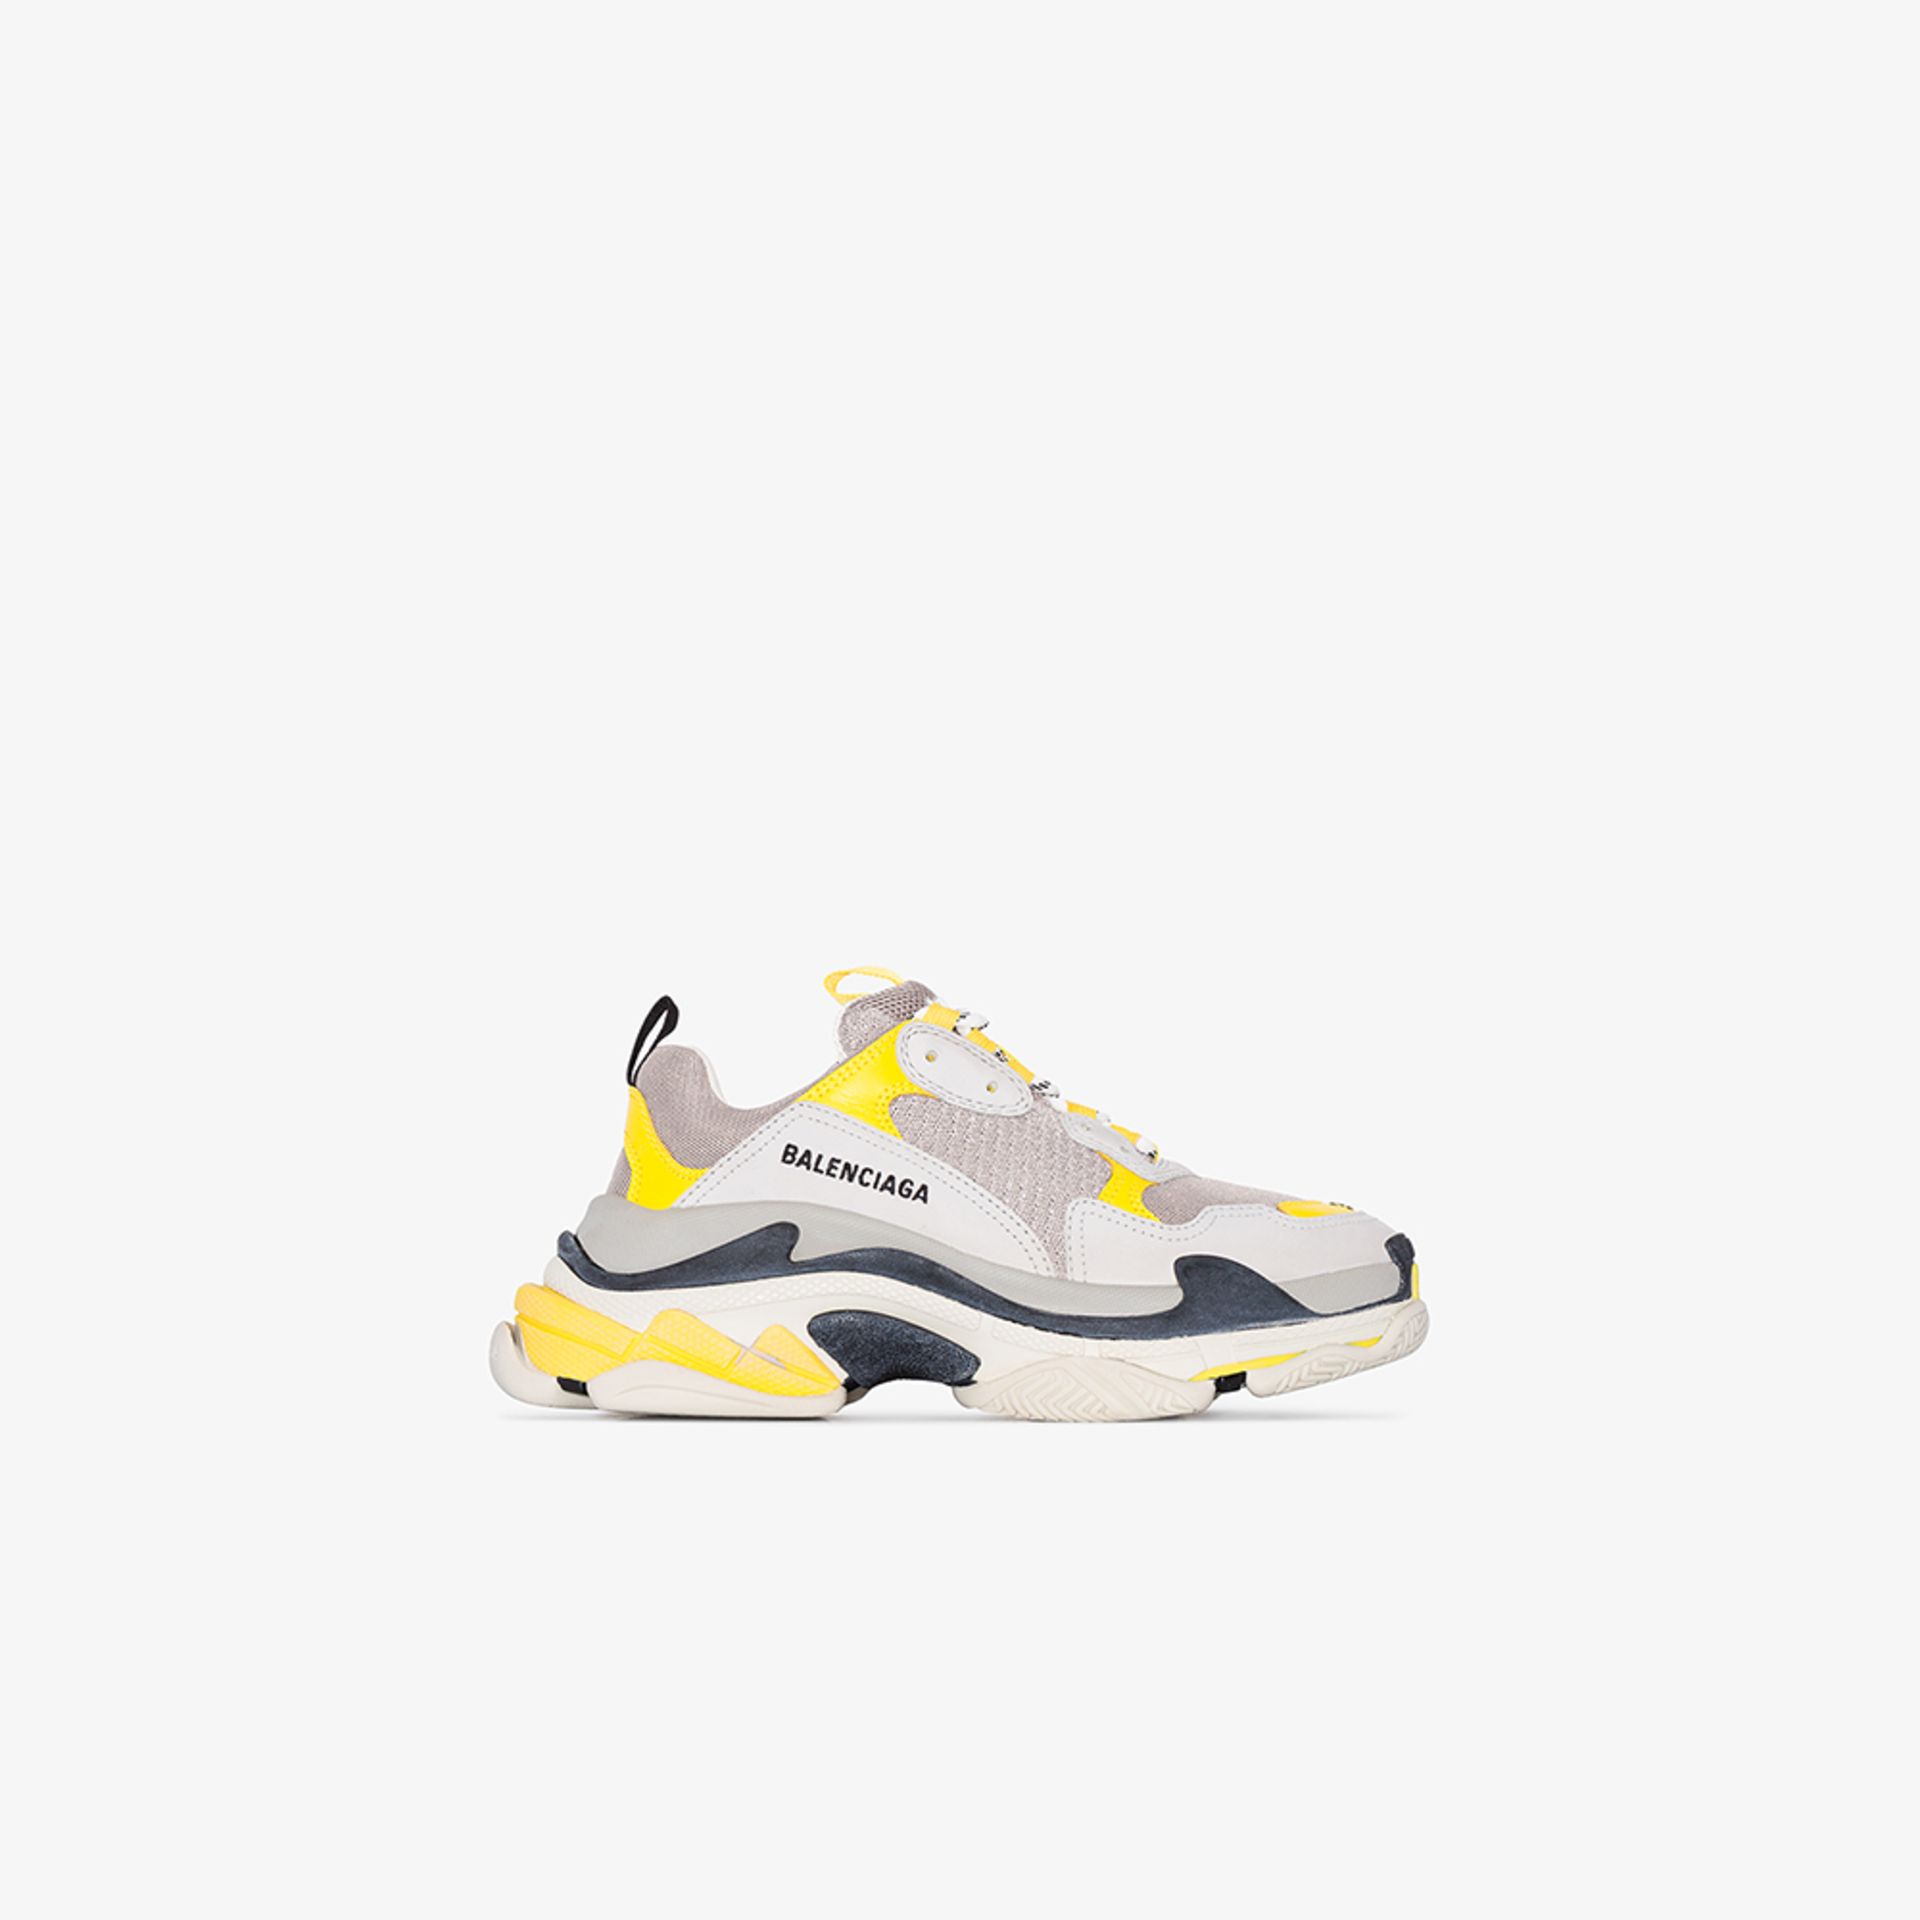 white and yellow sneakers